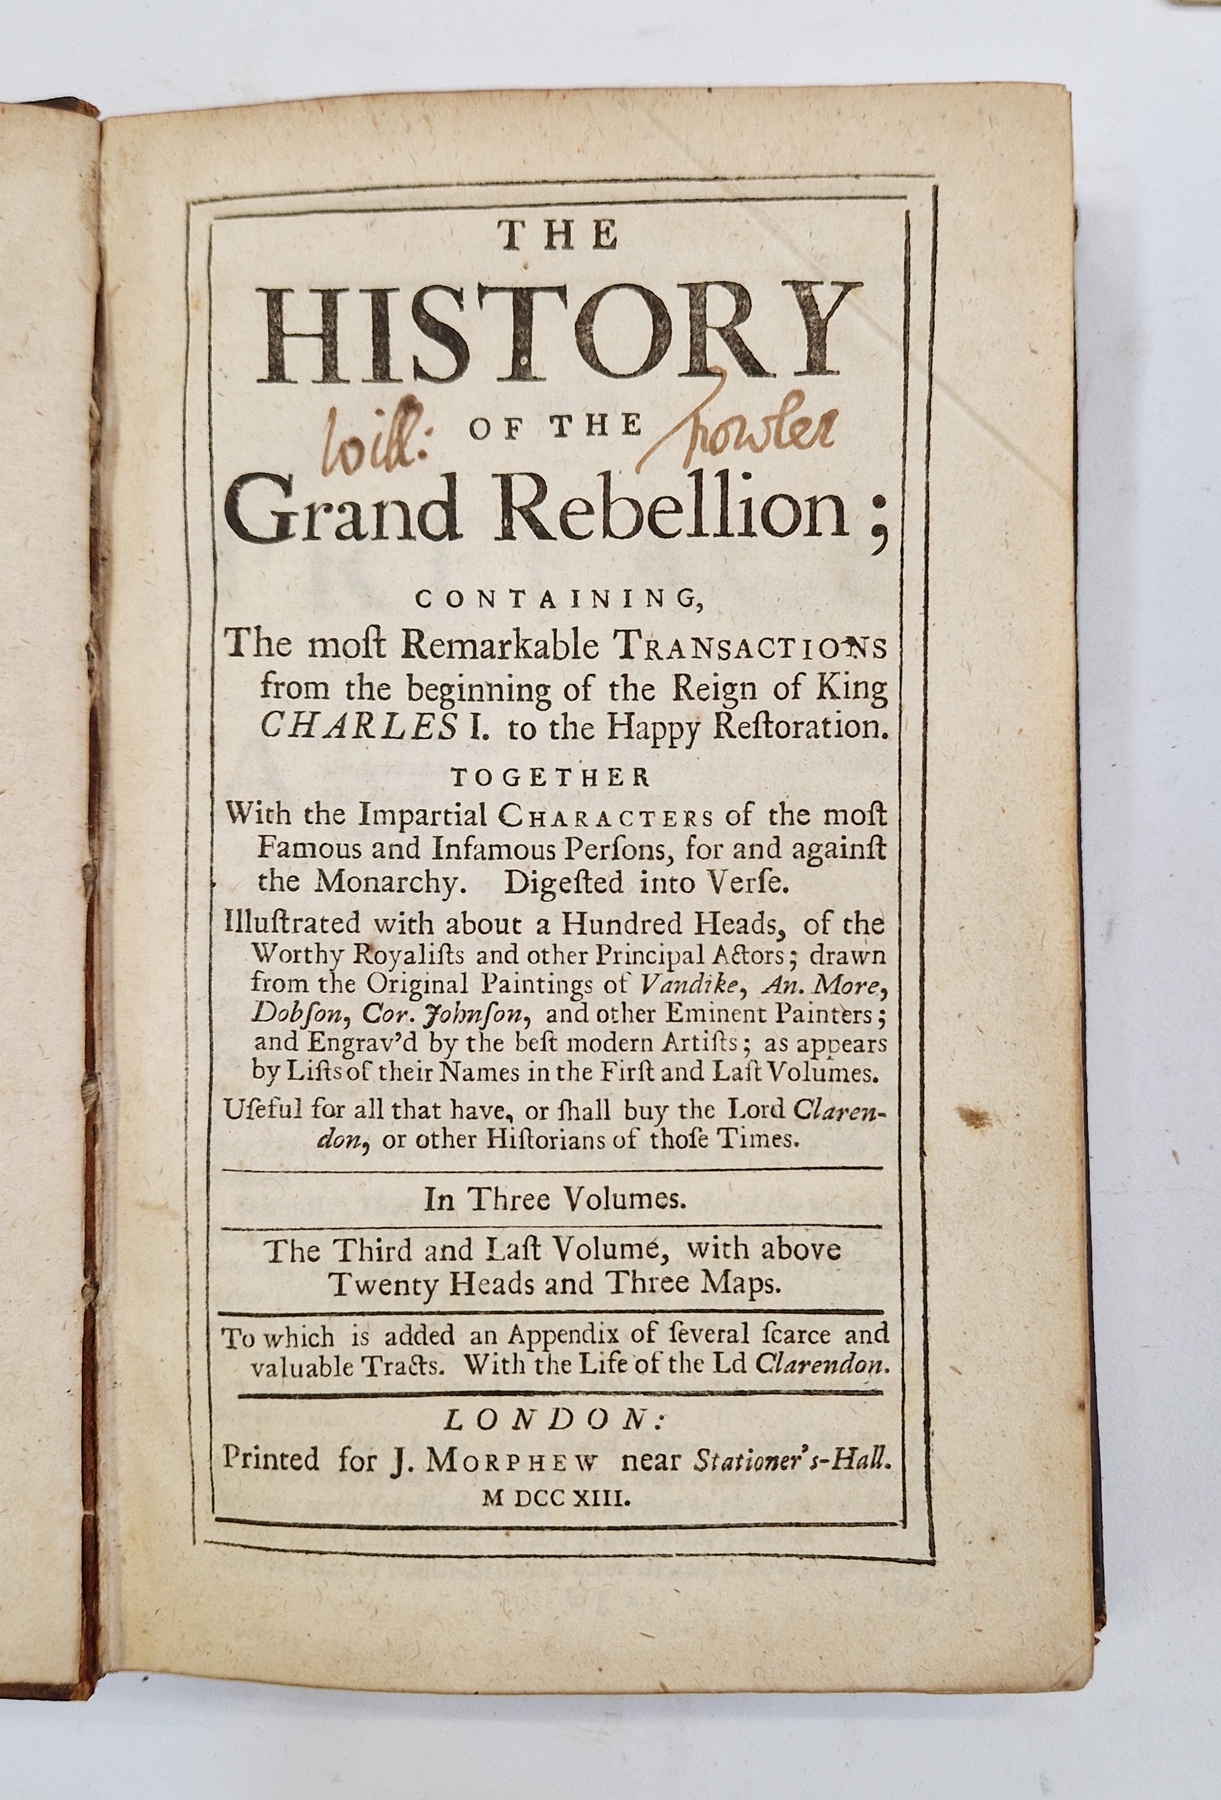 "The Works of King Charles The Martyr: with Collections of Declarations, Treaties and other Papers - Image 4 of 6